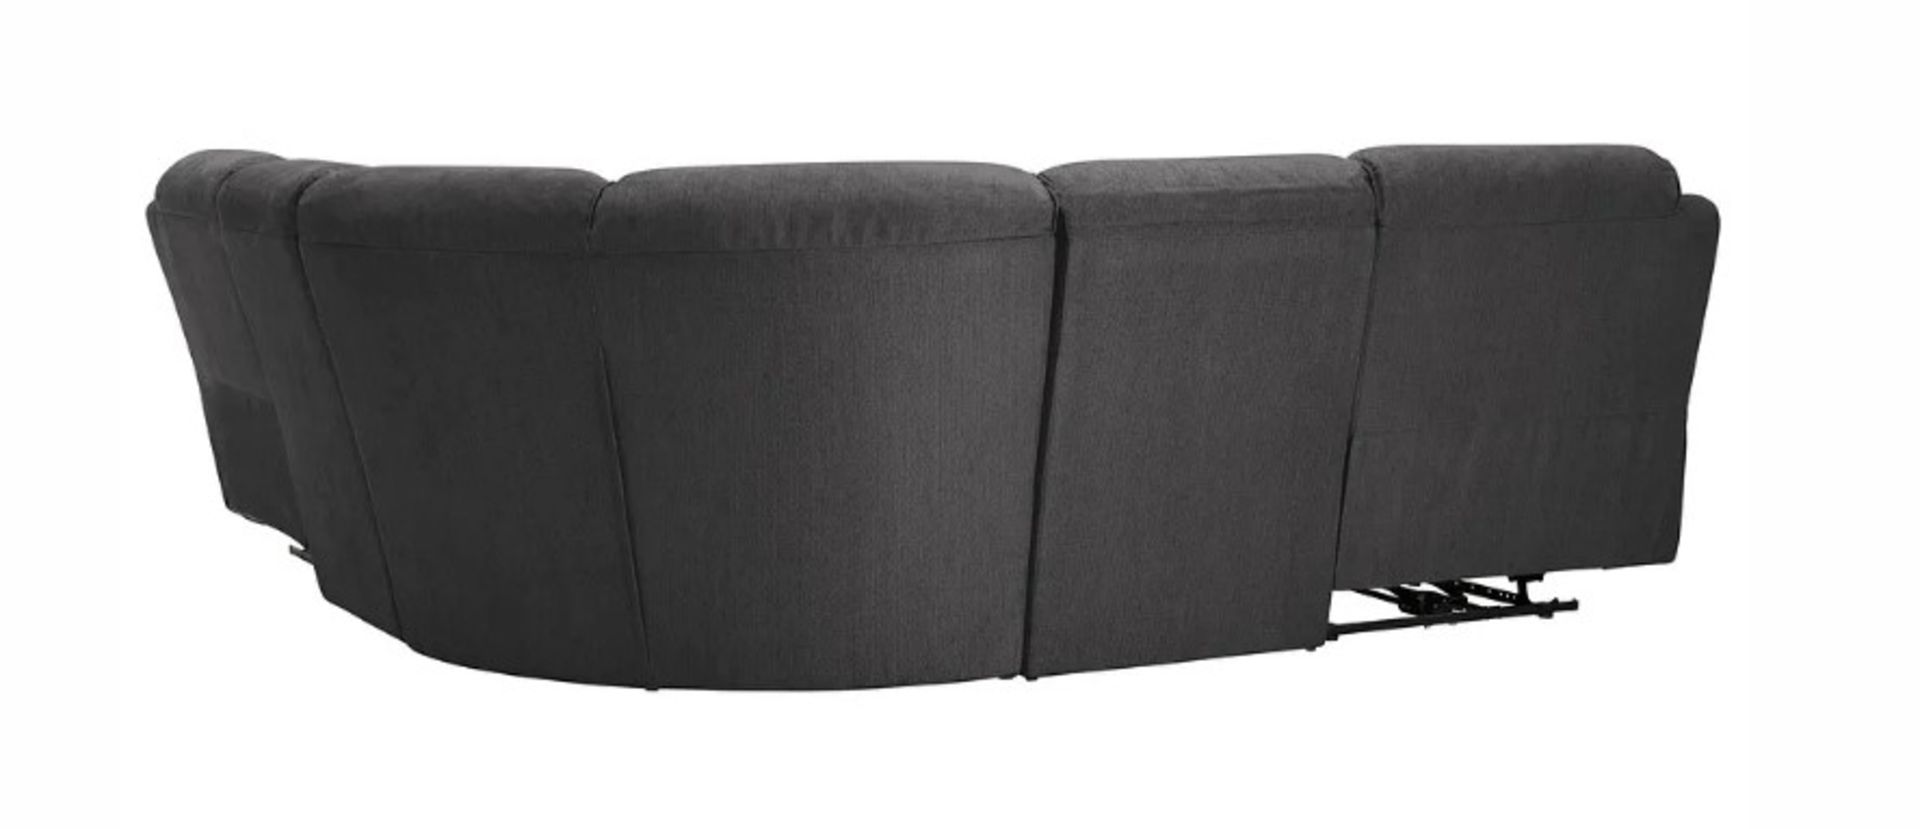 GOODWOOD 6 Seat Corner Recliner Sofa | Plush Charcoal Fabric. RRP £2,549. (ROW7-6BOXES) The Goodwood - Image 6 of 9